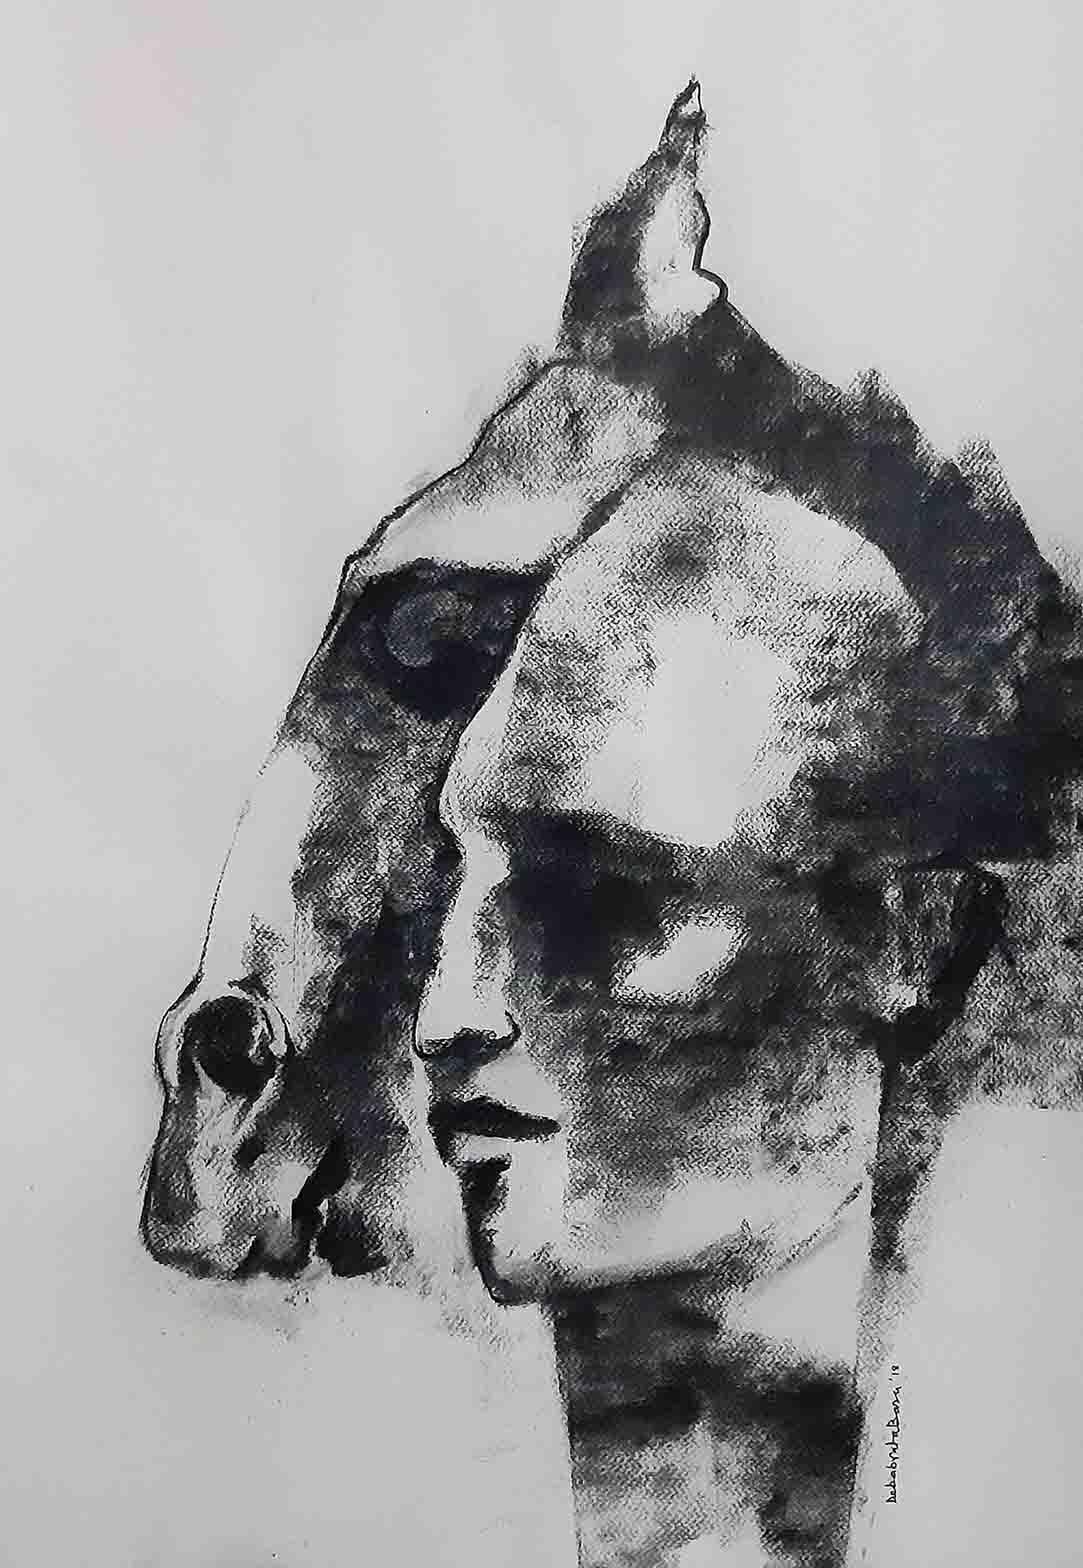 Man and Horse, Charcoal Drawing, Black, White by Indian Artist "In Stock"